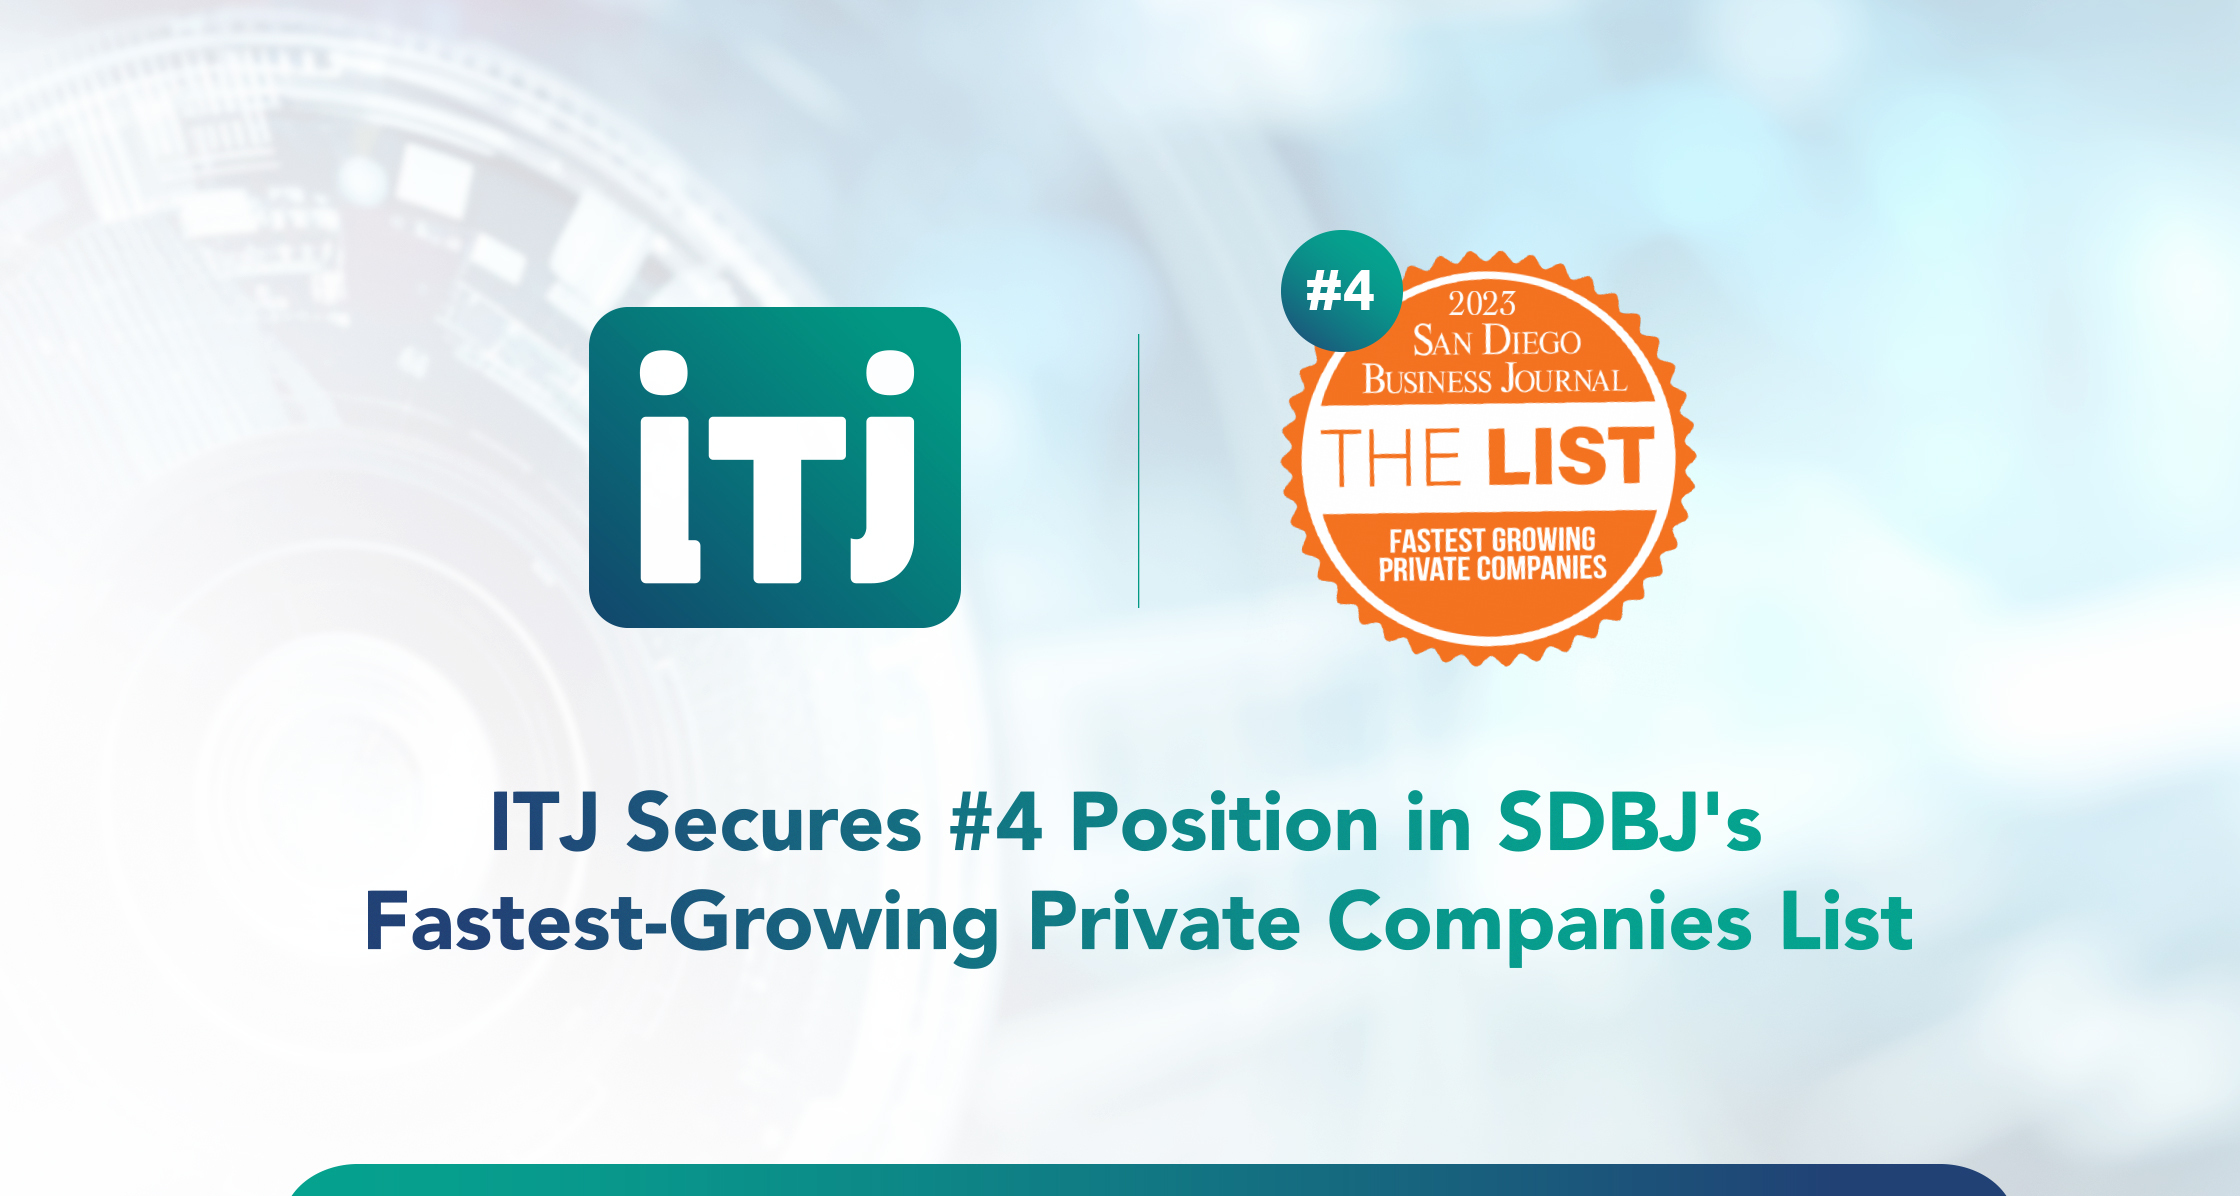 ITJ Secures #4 Position in SDBJ's Fastest-Growing Private Companies List